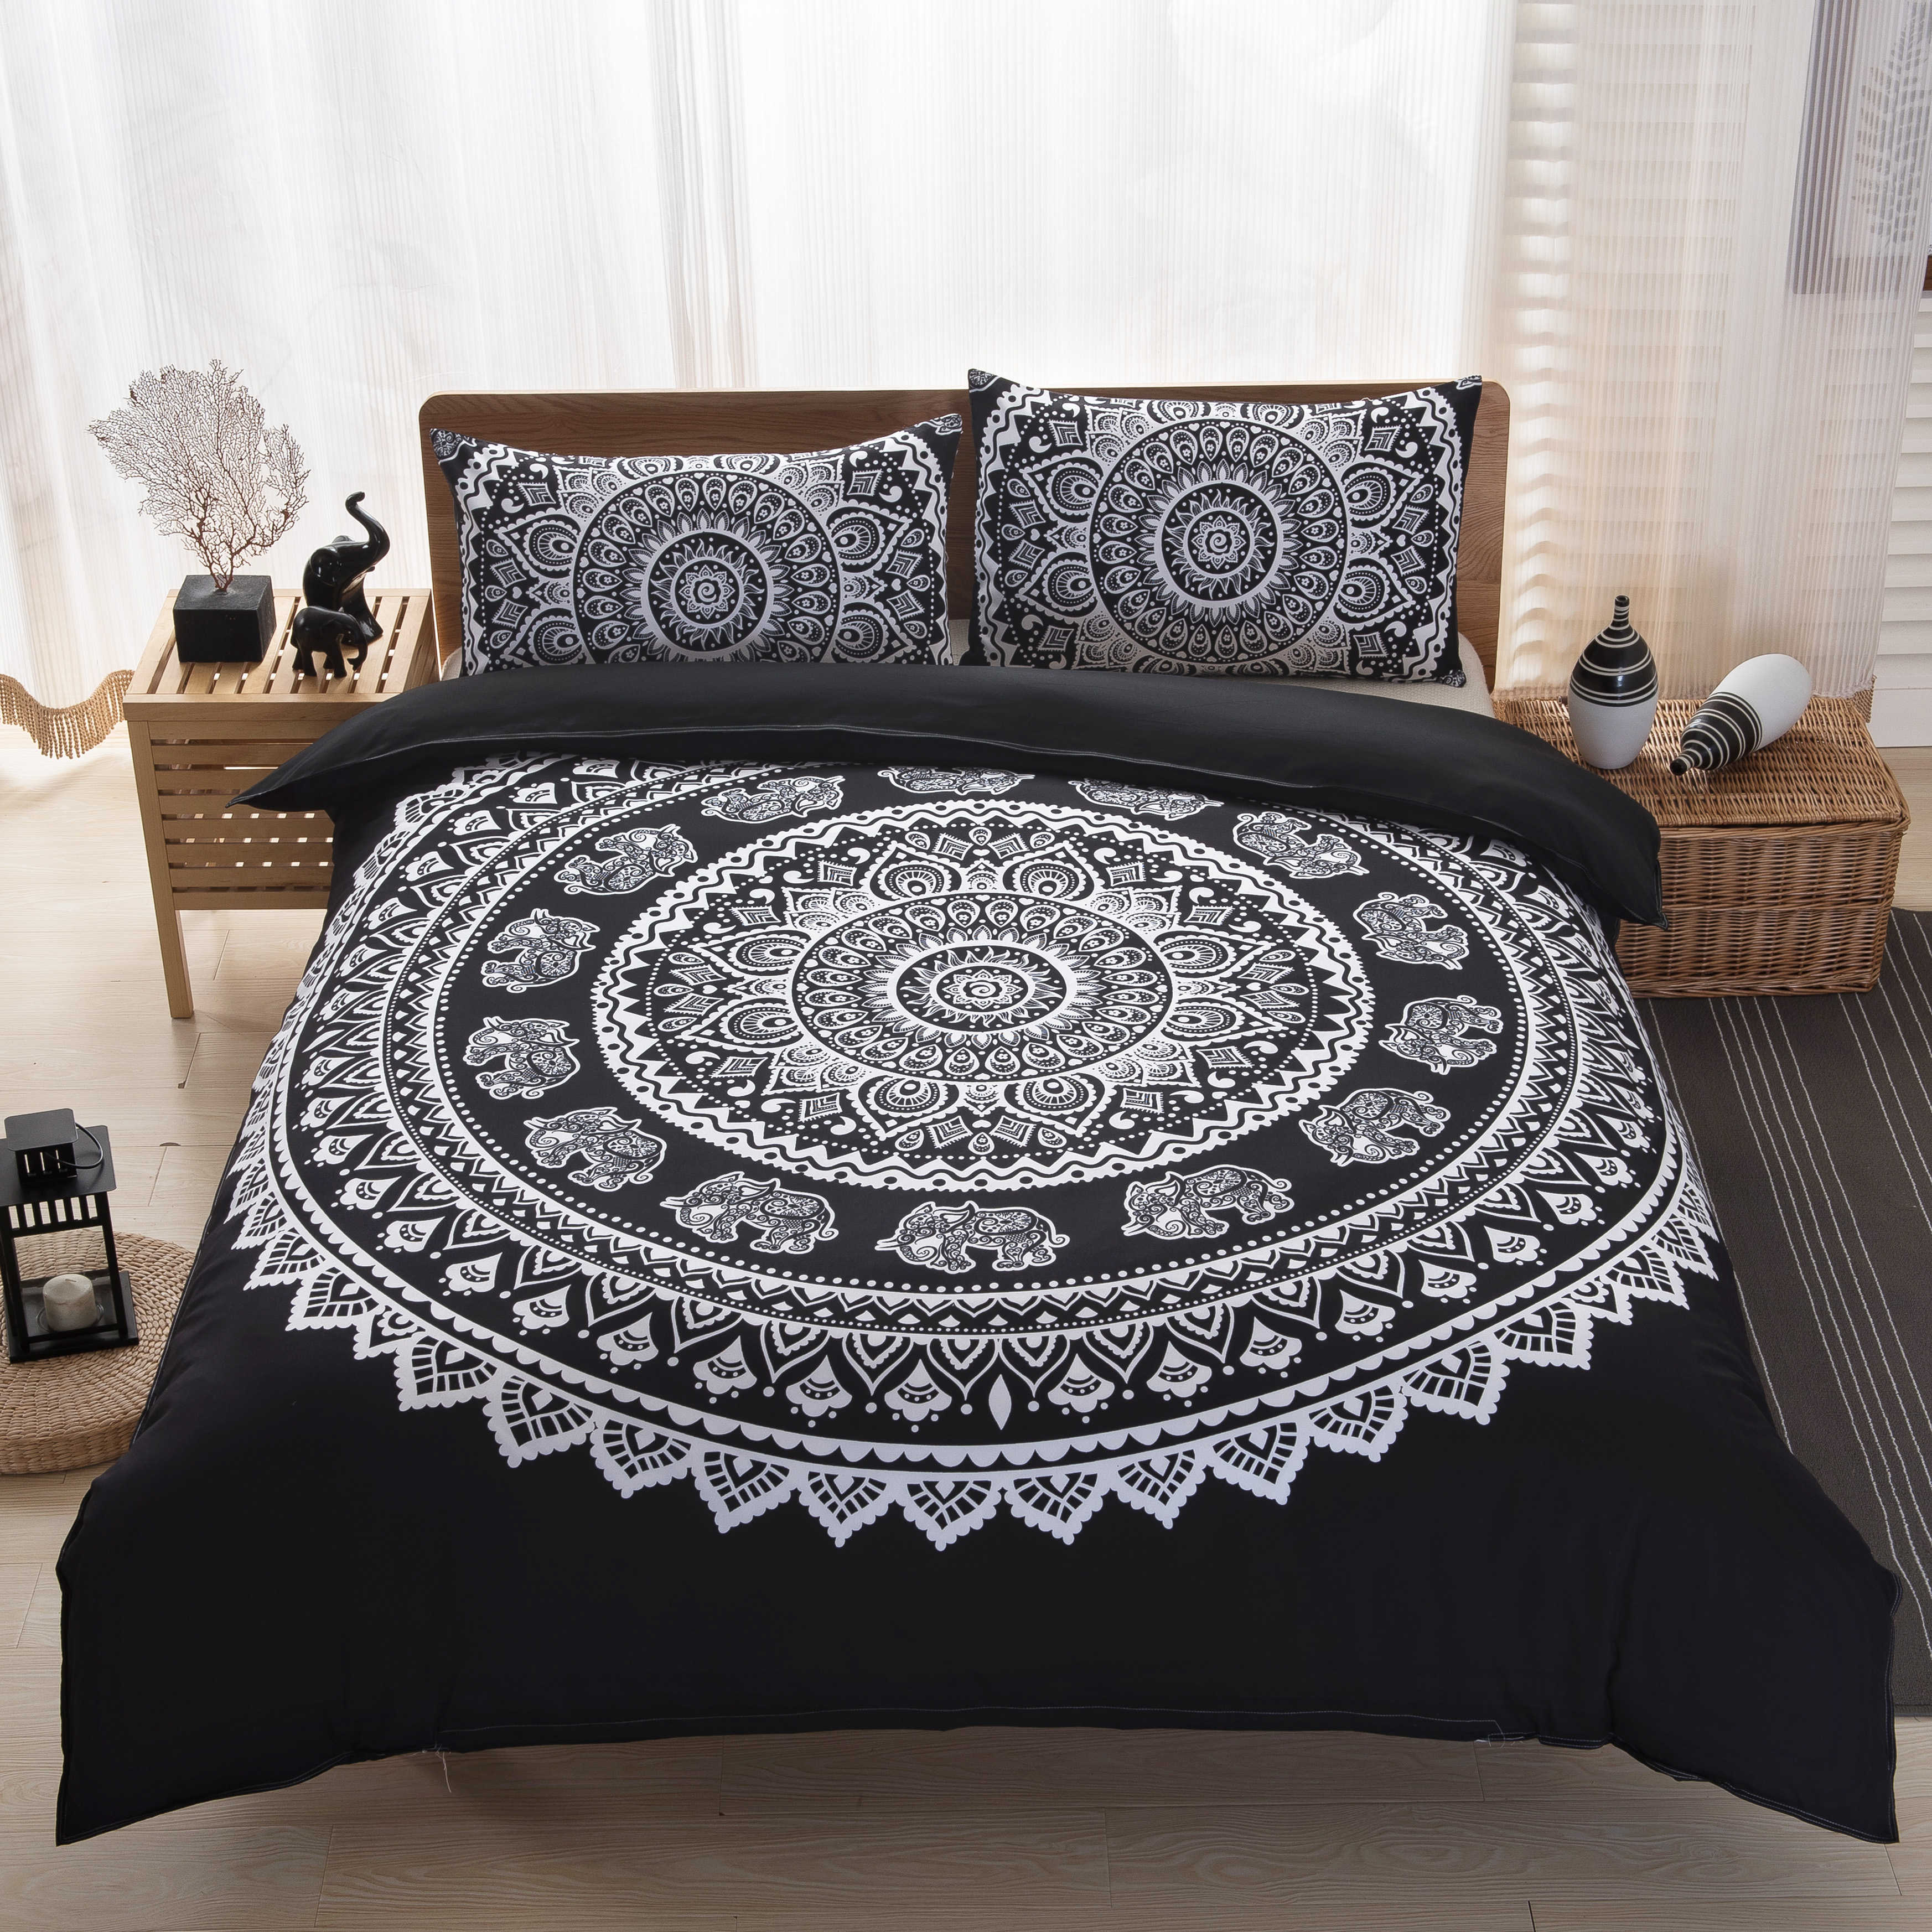 

3 PCS Bedding Sets National Style Printing Quilt Cover Pillowcase For Queen Size